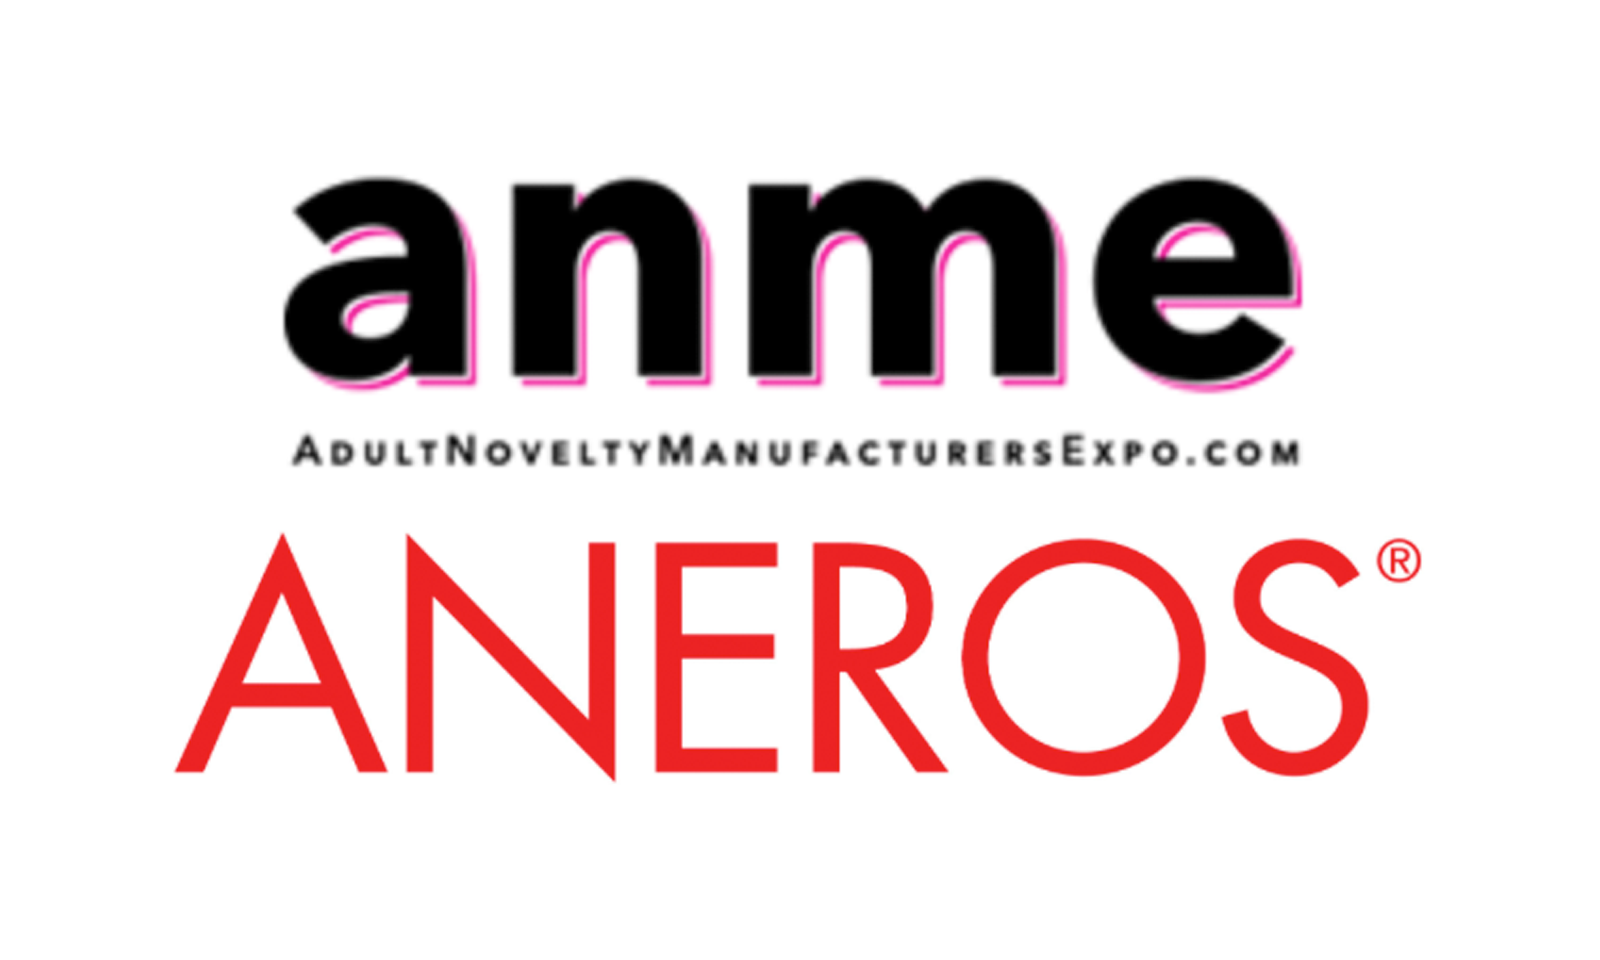 Aneros Bringing Advanced Line of Prostate Massagers, More to ANME